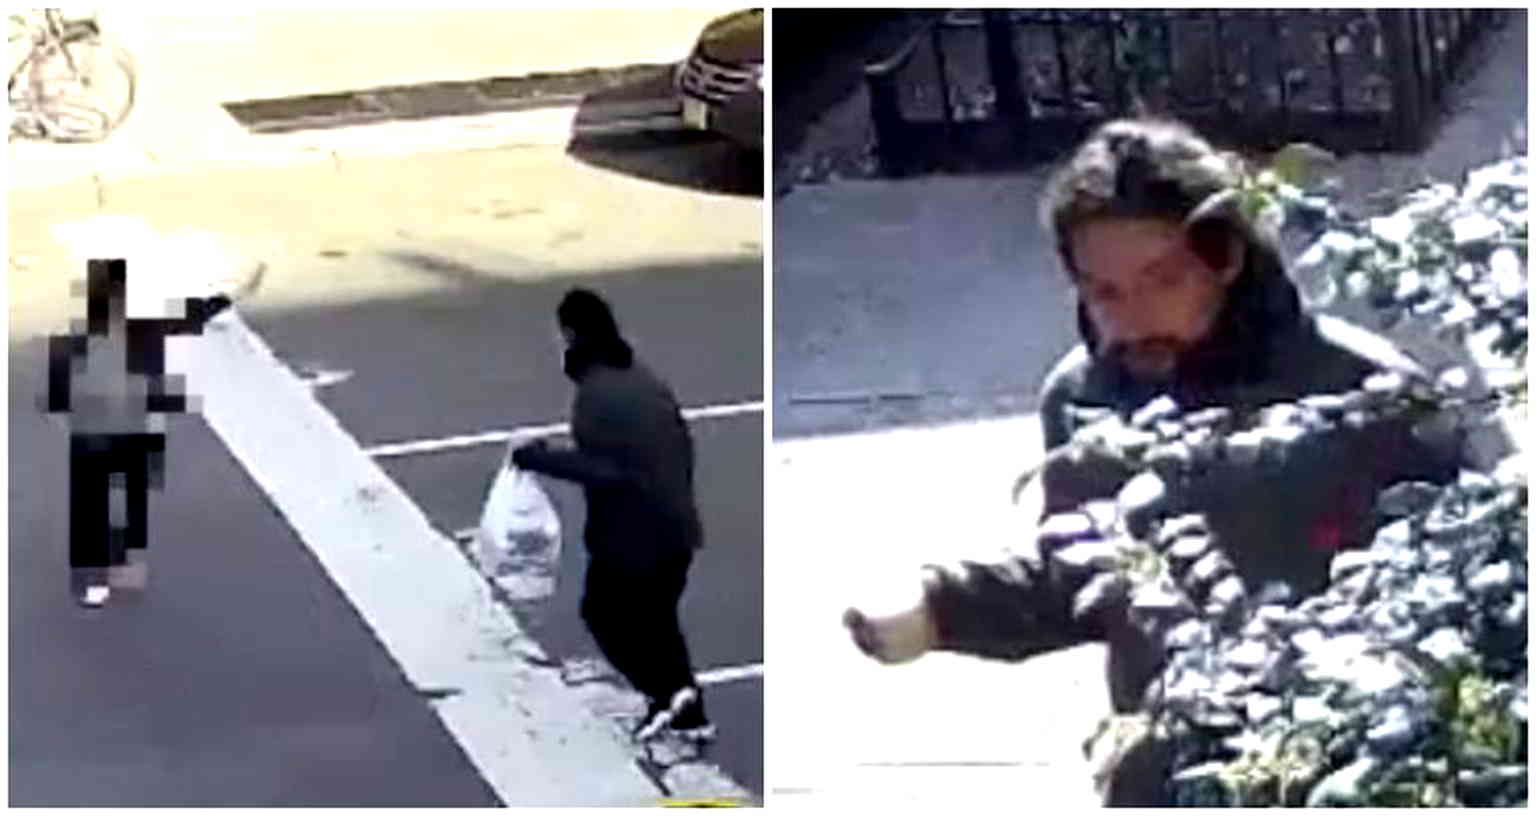 Elderly Asian American woman, 68, chased and punched to the ground in Chelsea